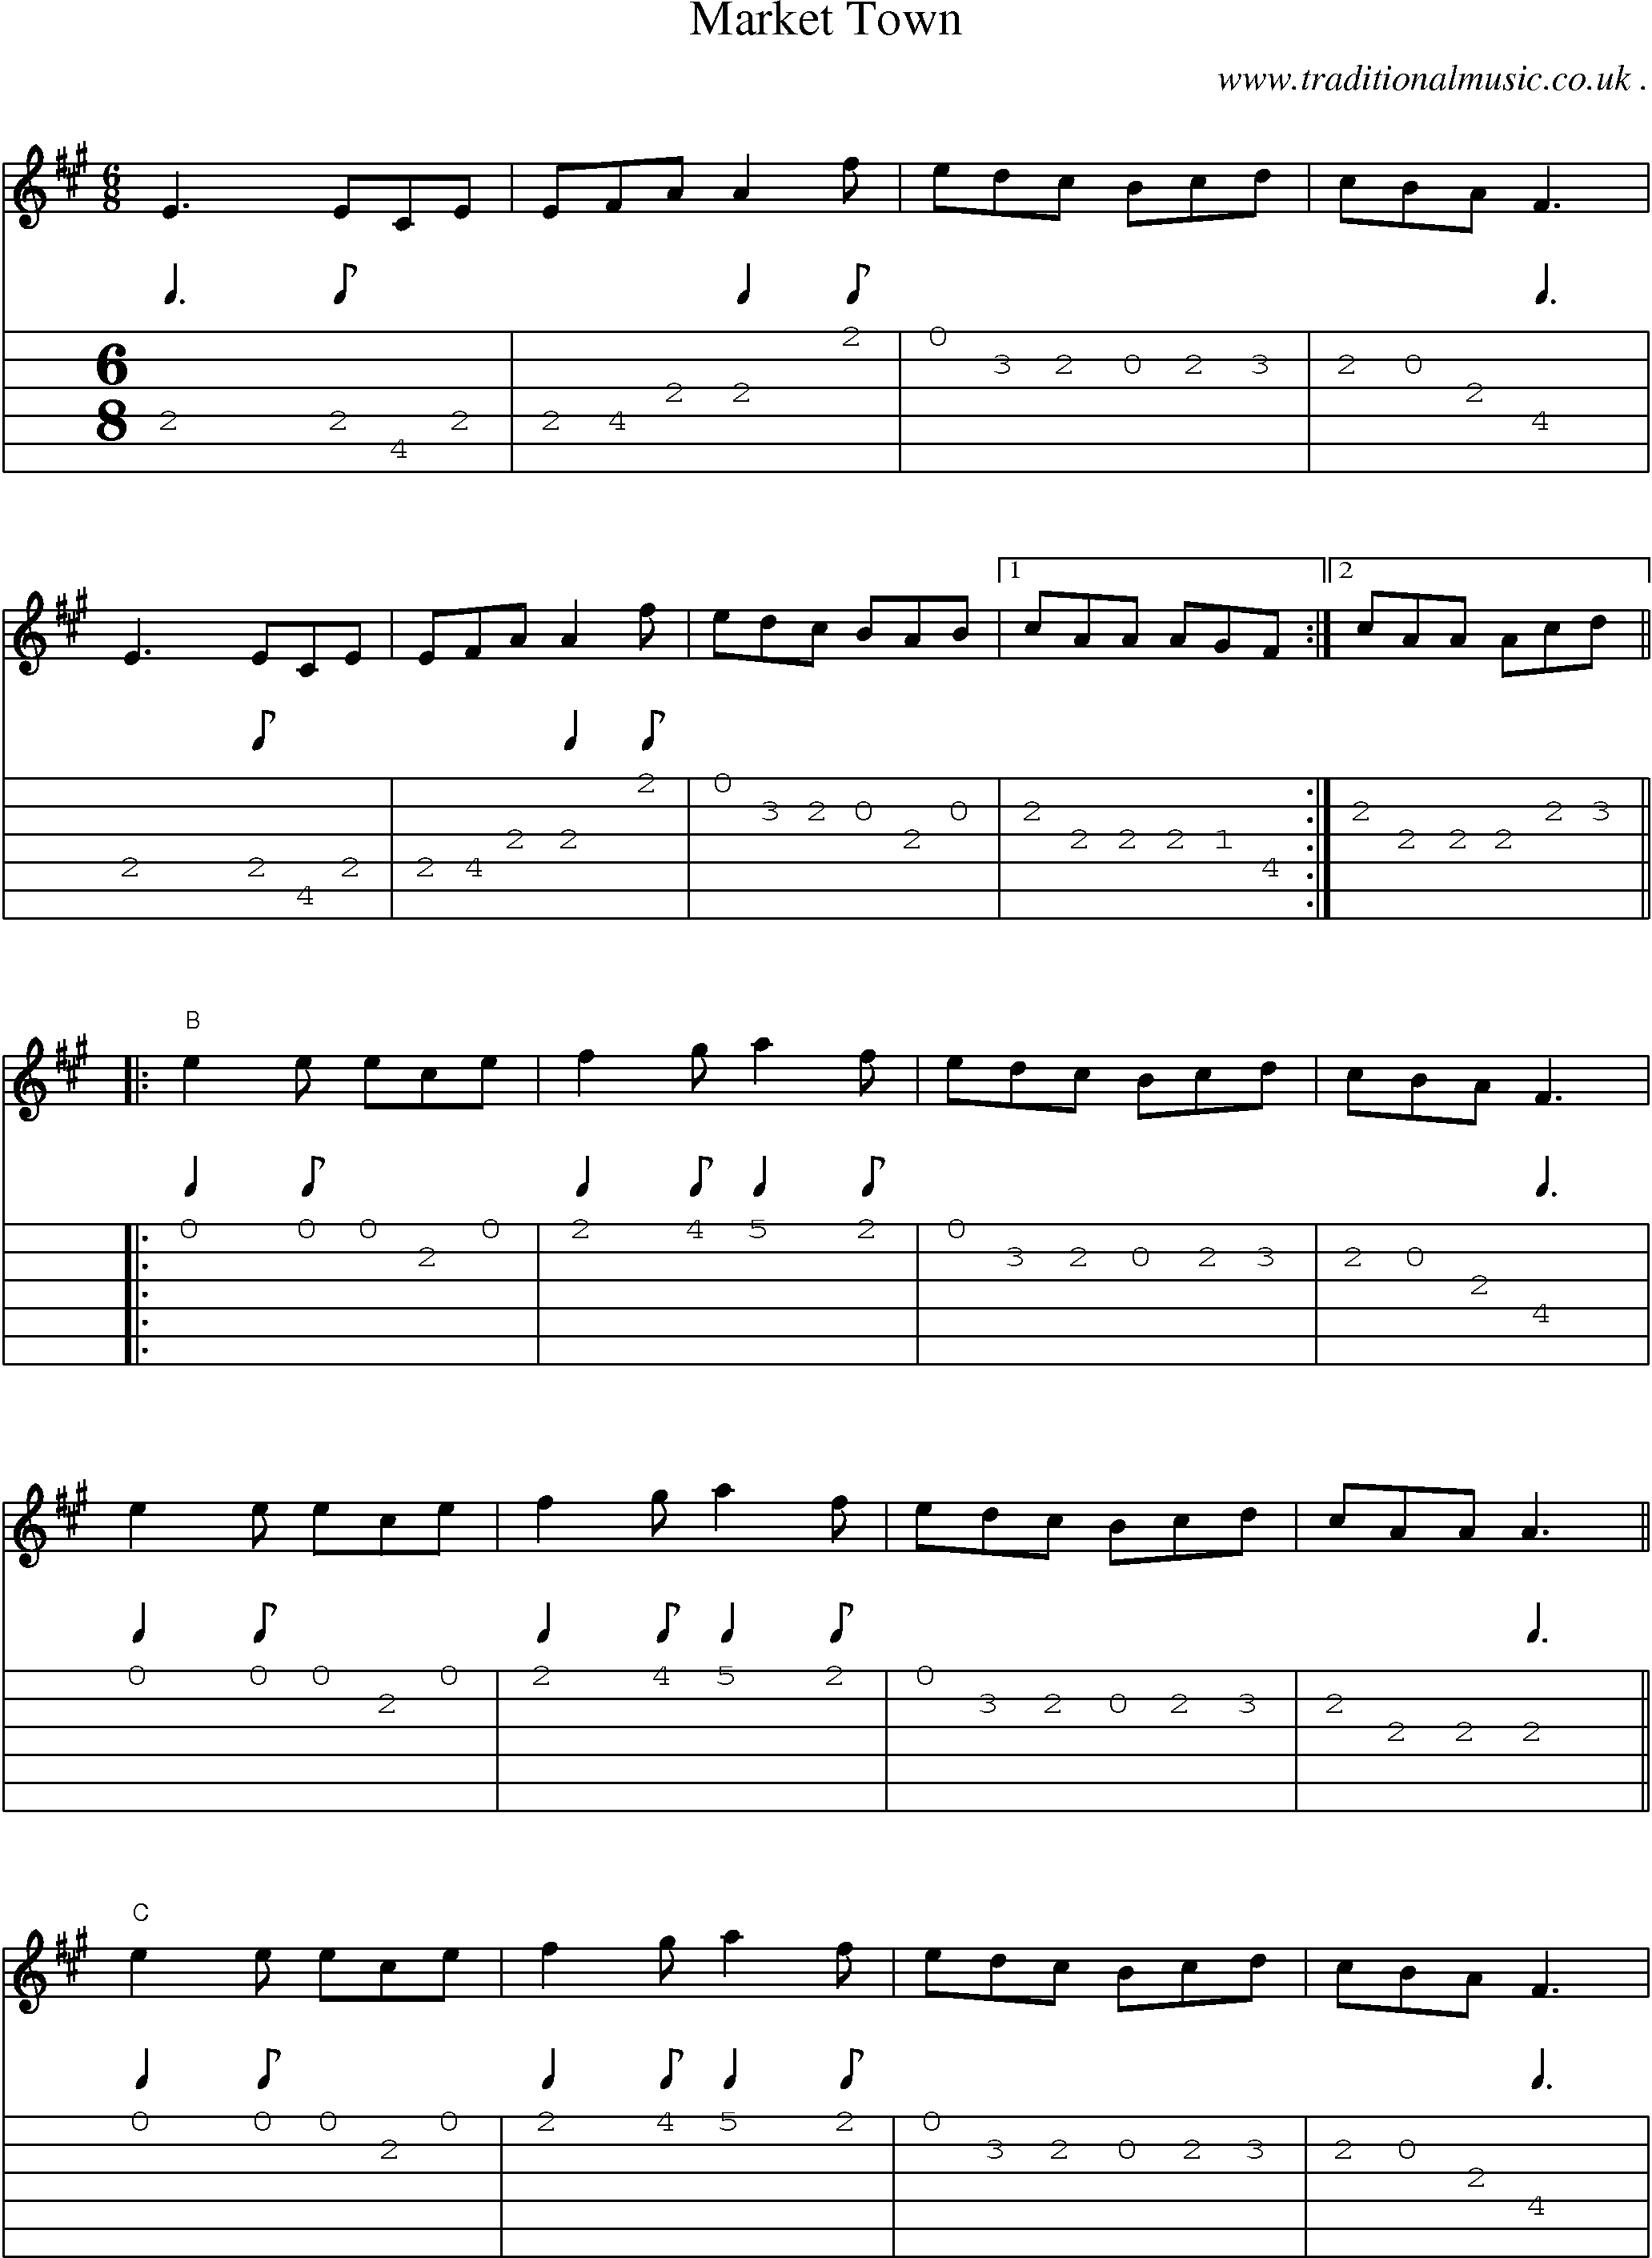 Sheet-Music and Guitar Tabs for Market Town